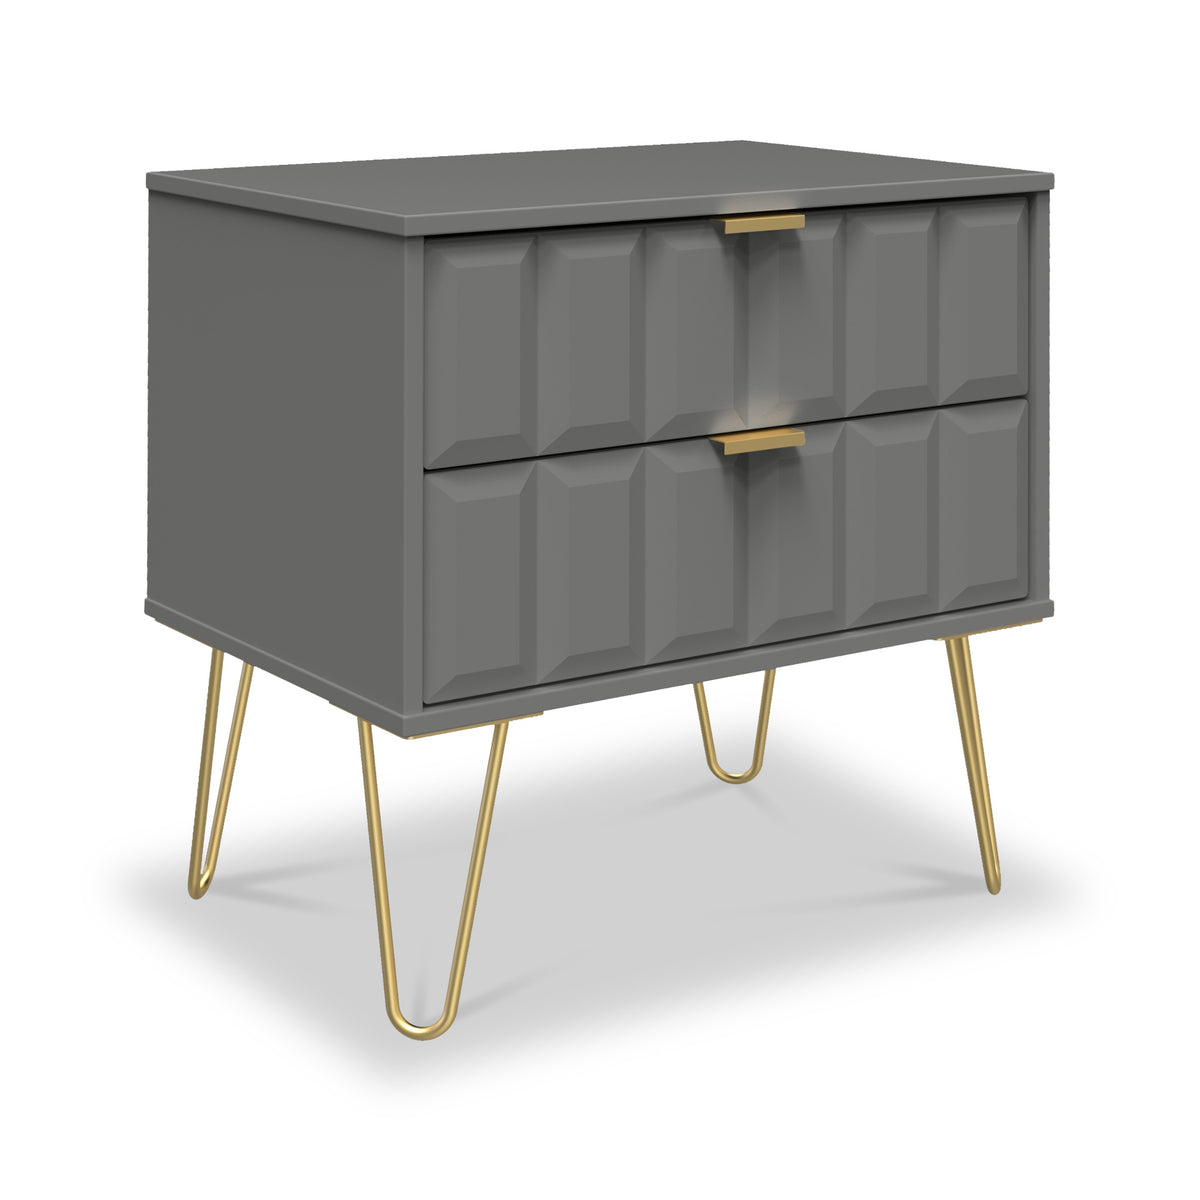 Harlow Grey 2 Drawer Utility Chest with Gold Hairpin Legs from Roseland